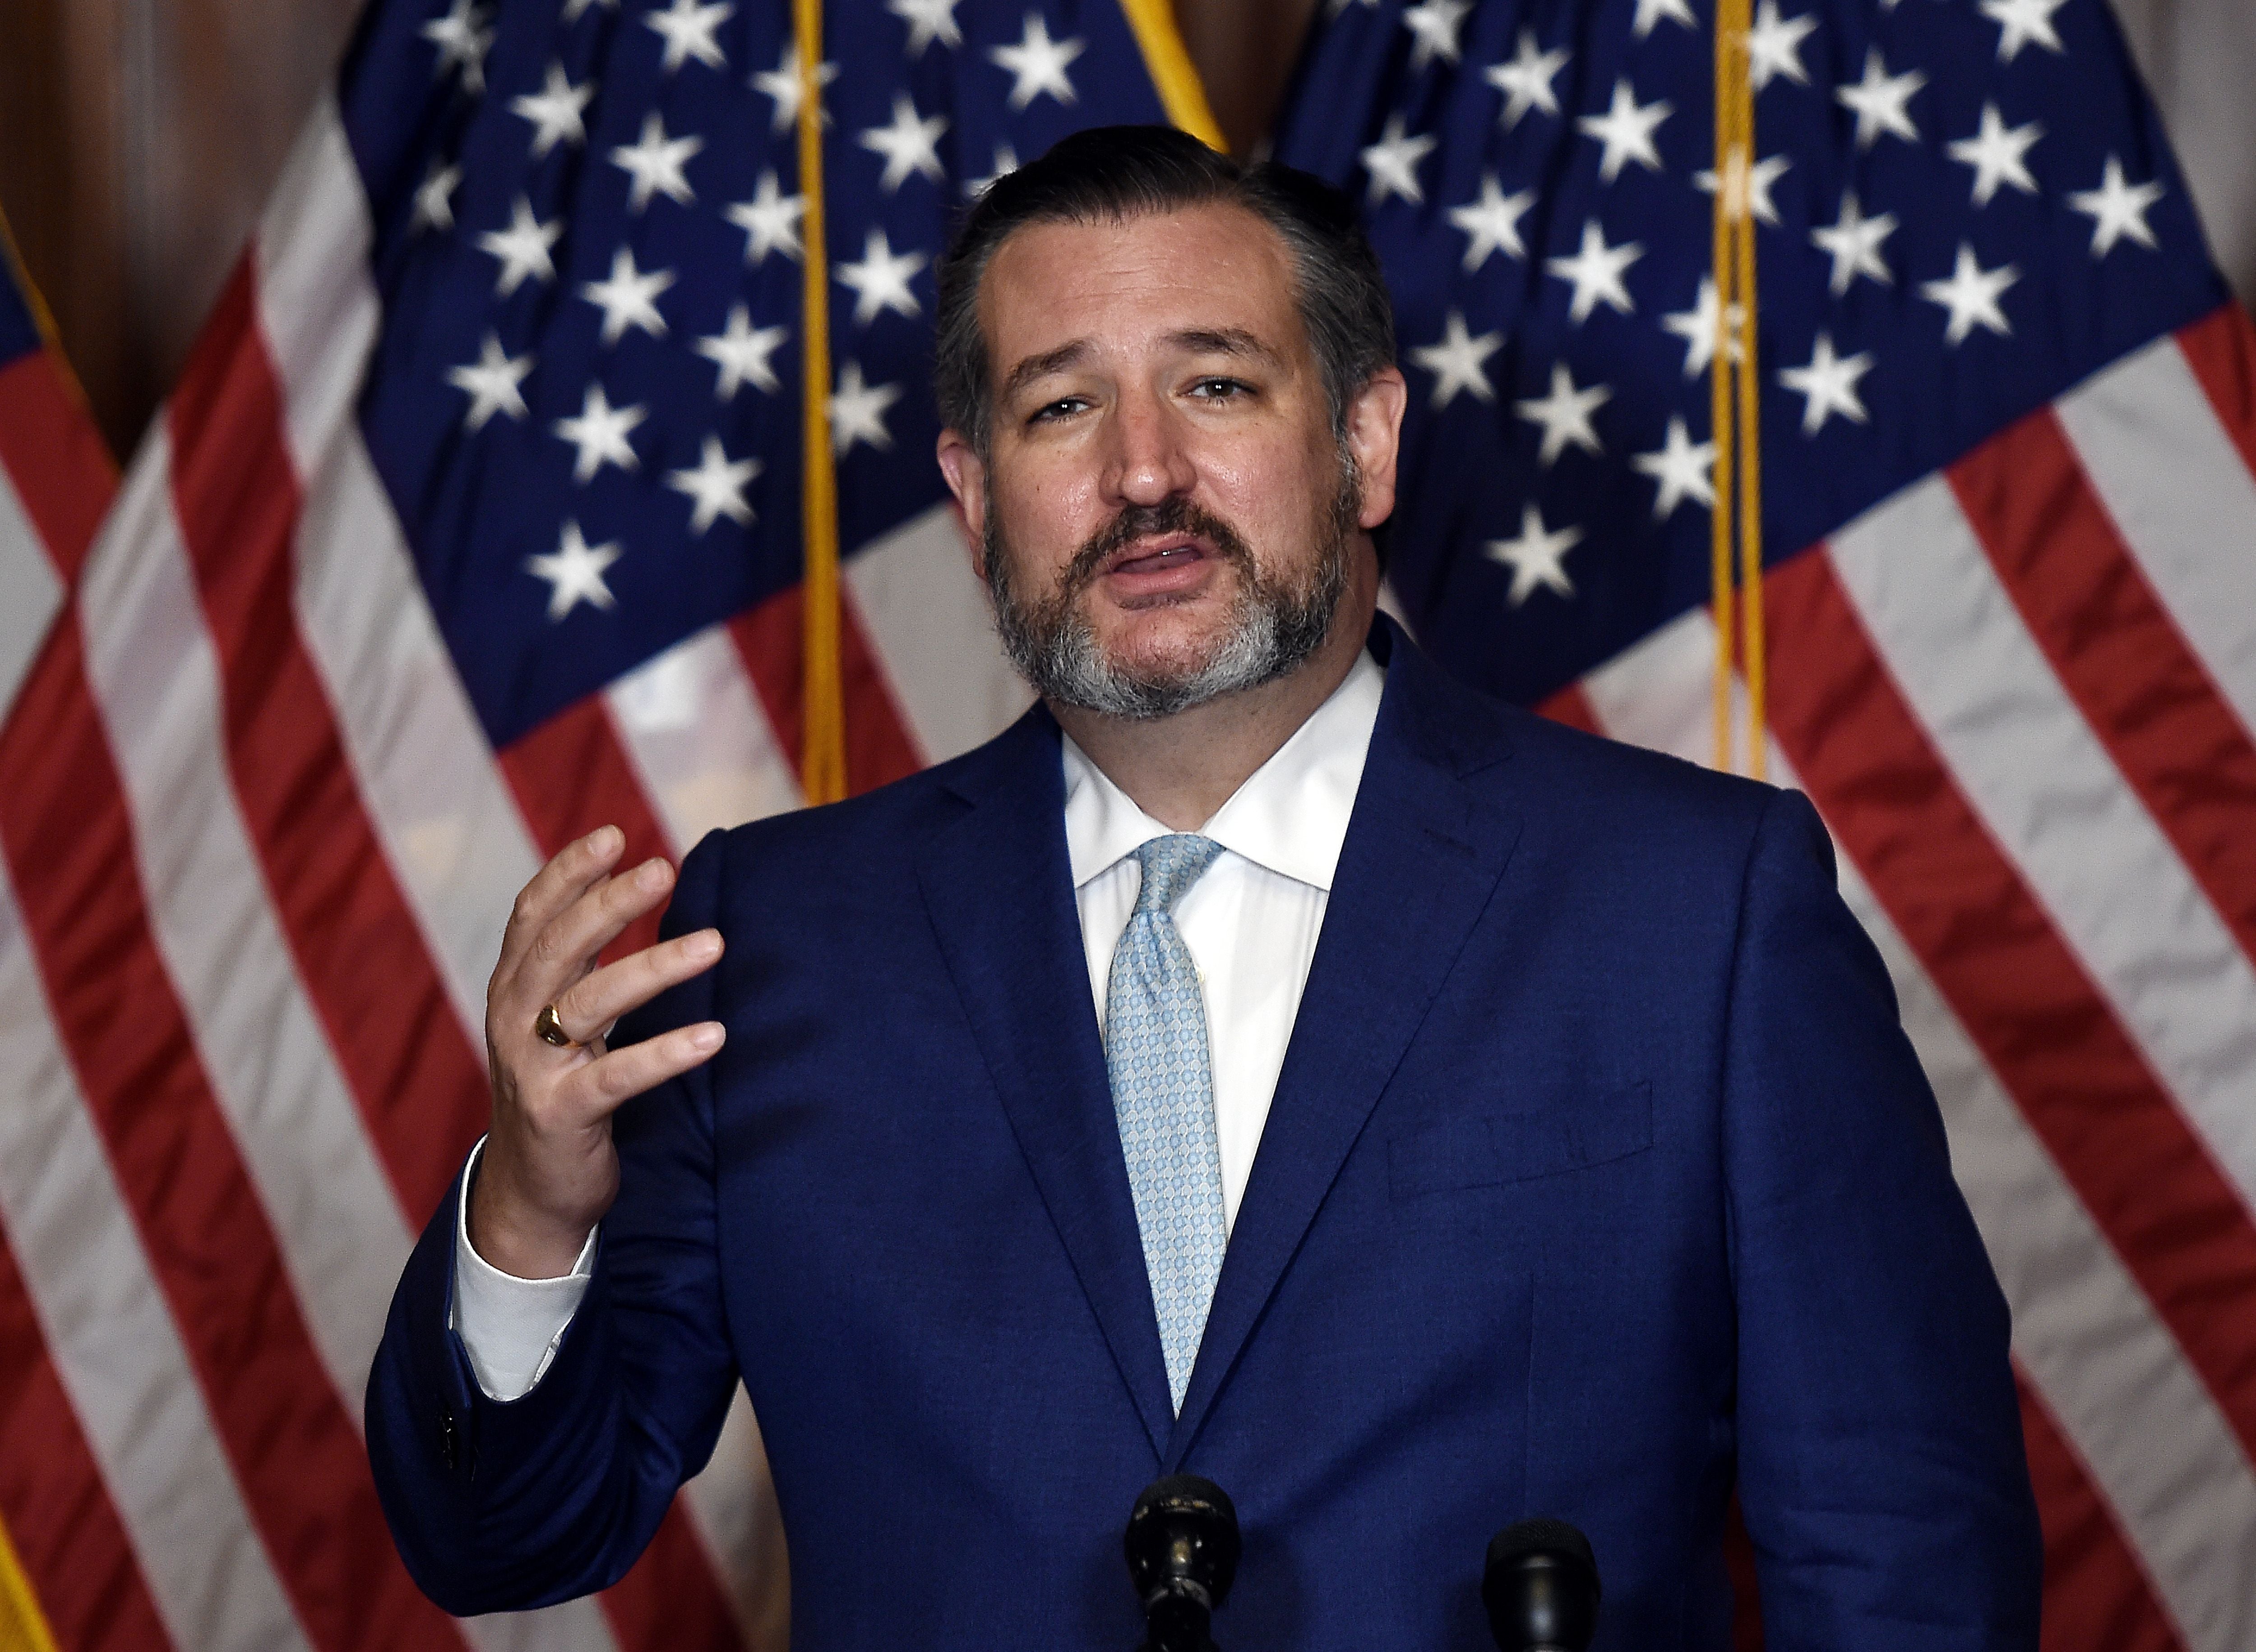 Ted Cruz says he will present Pennsylvania mail-in ballot lawsuit if SCOTUS takes it